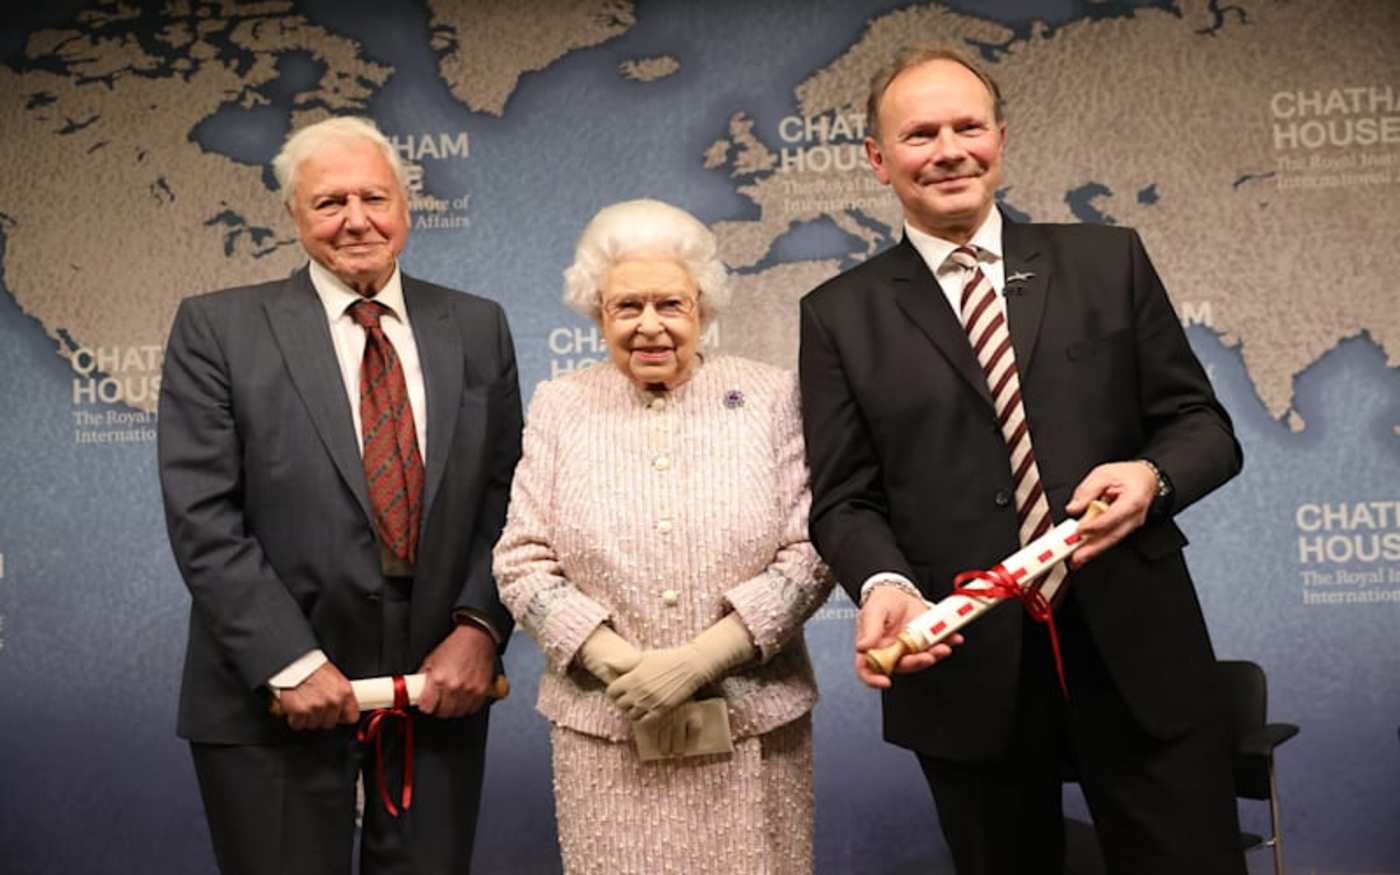 David Attenborough, the Queen and another gentleman stood in front of a large map